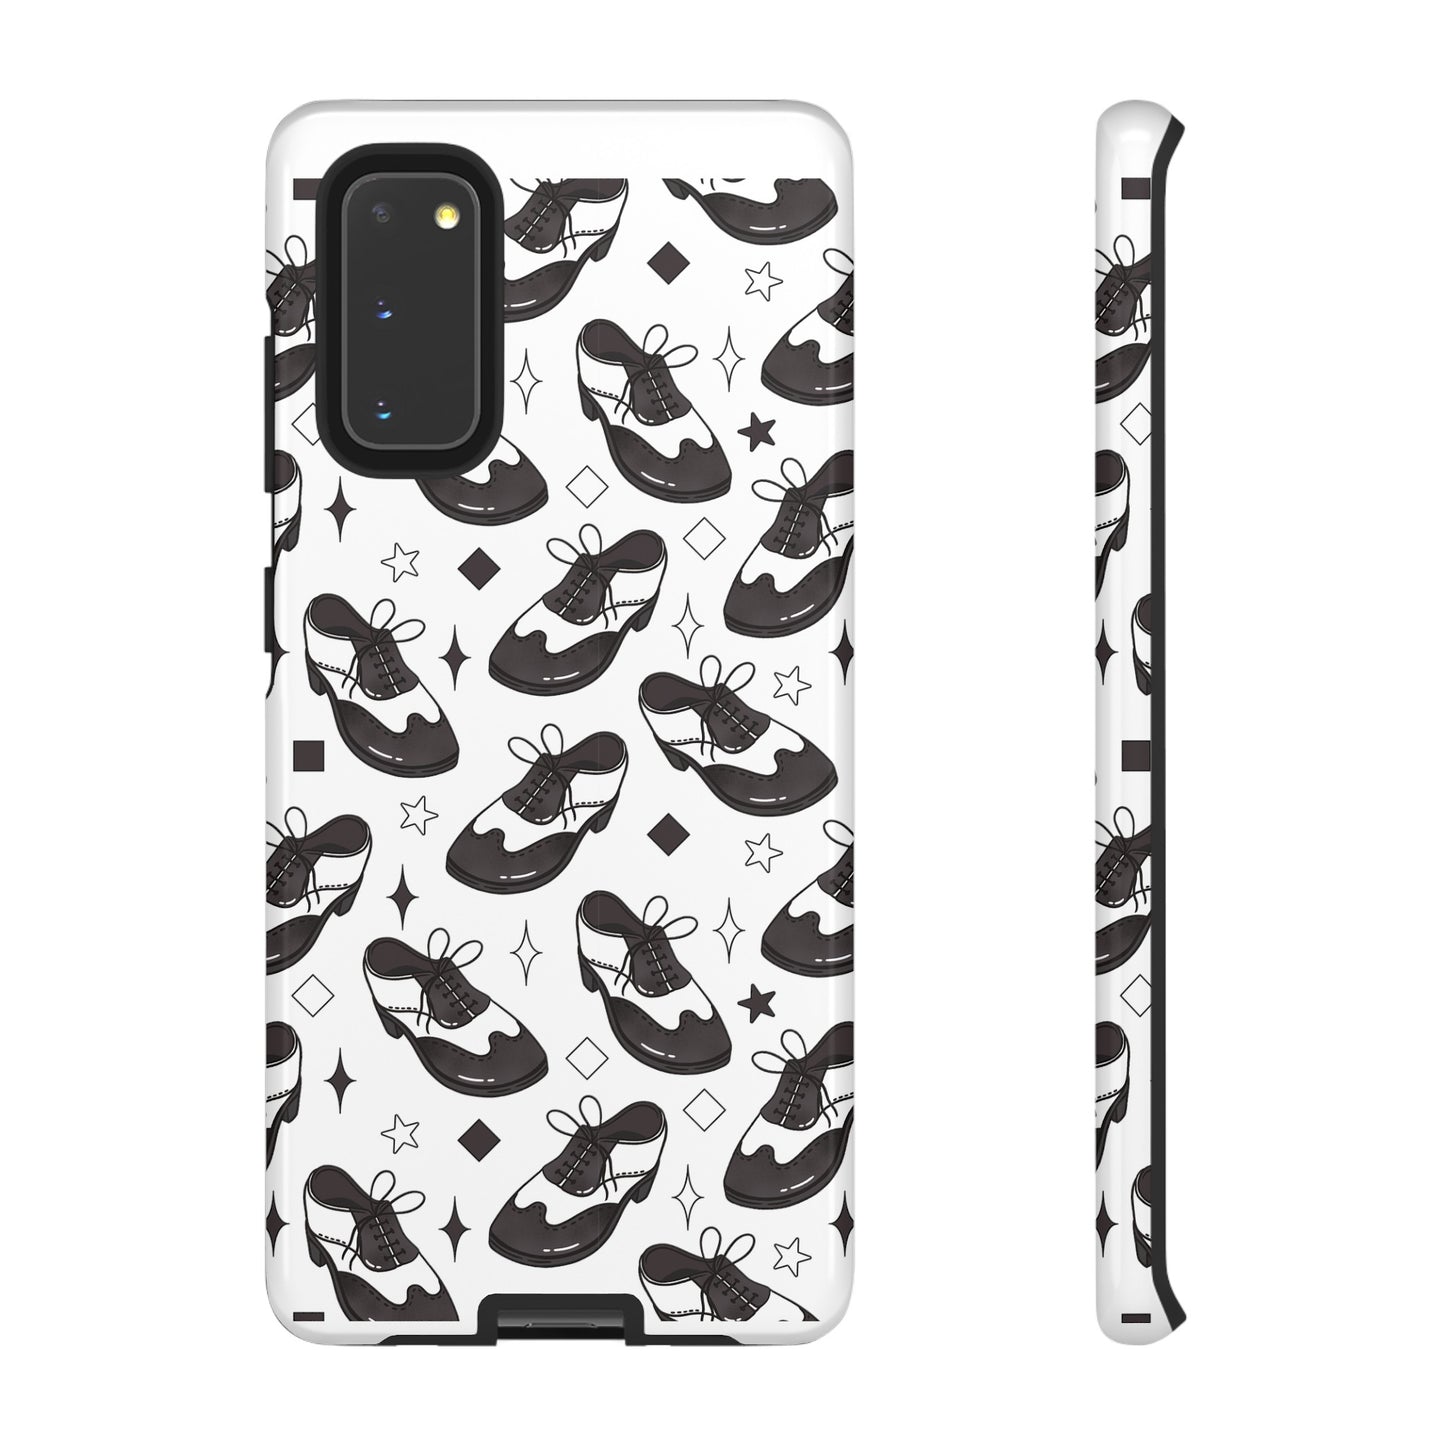 Spectator Style Tap Shoes Phone Case for iPhone, Samsung Galaxy, and Google Pixel